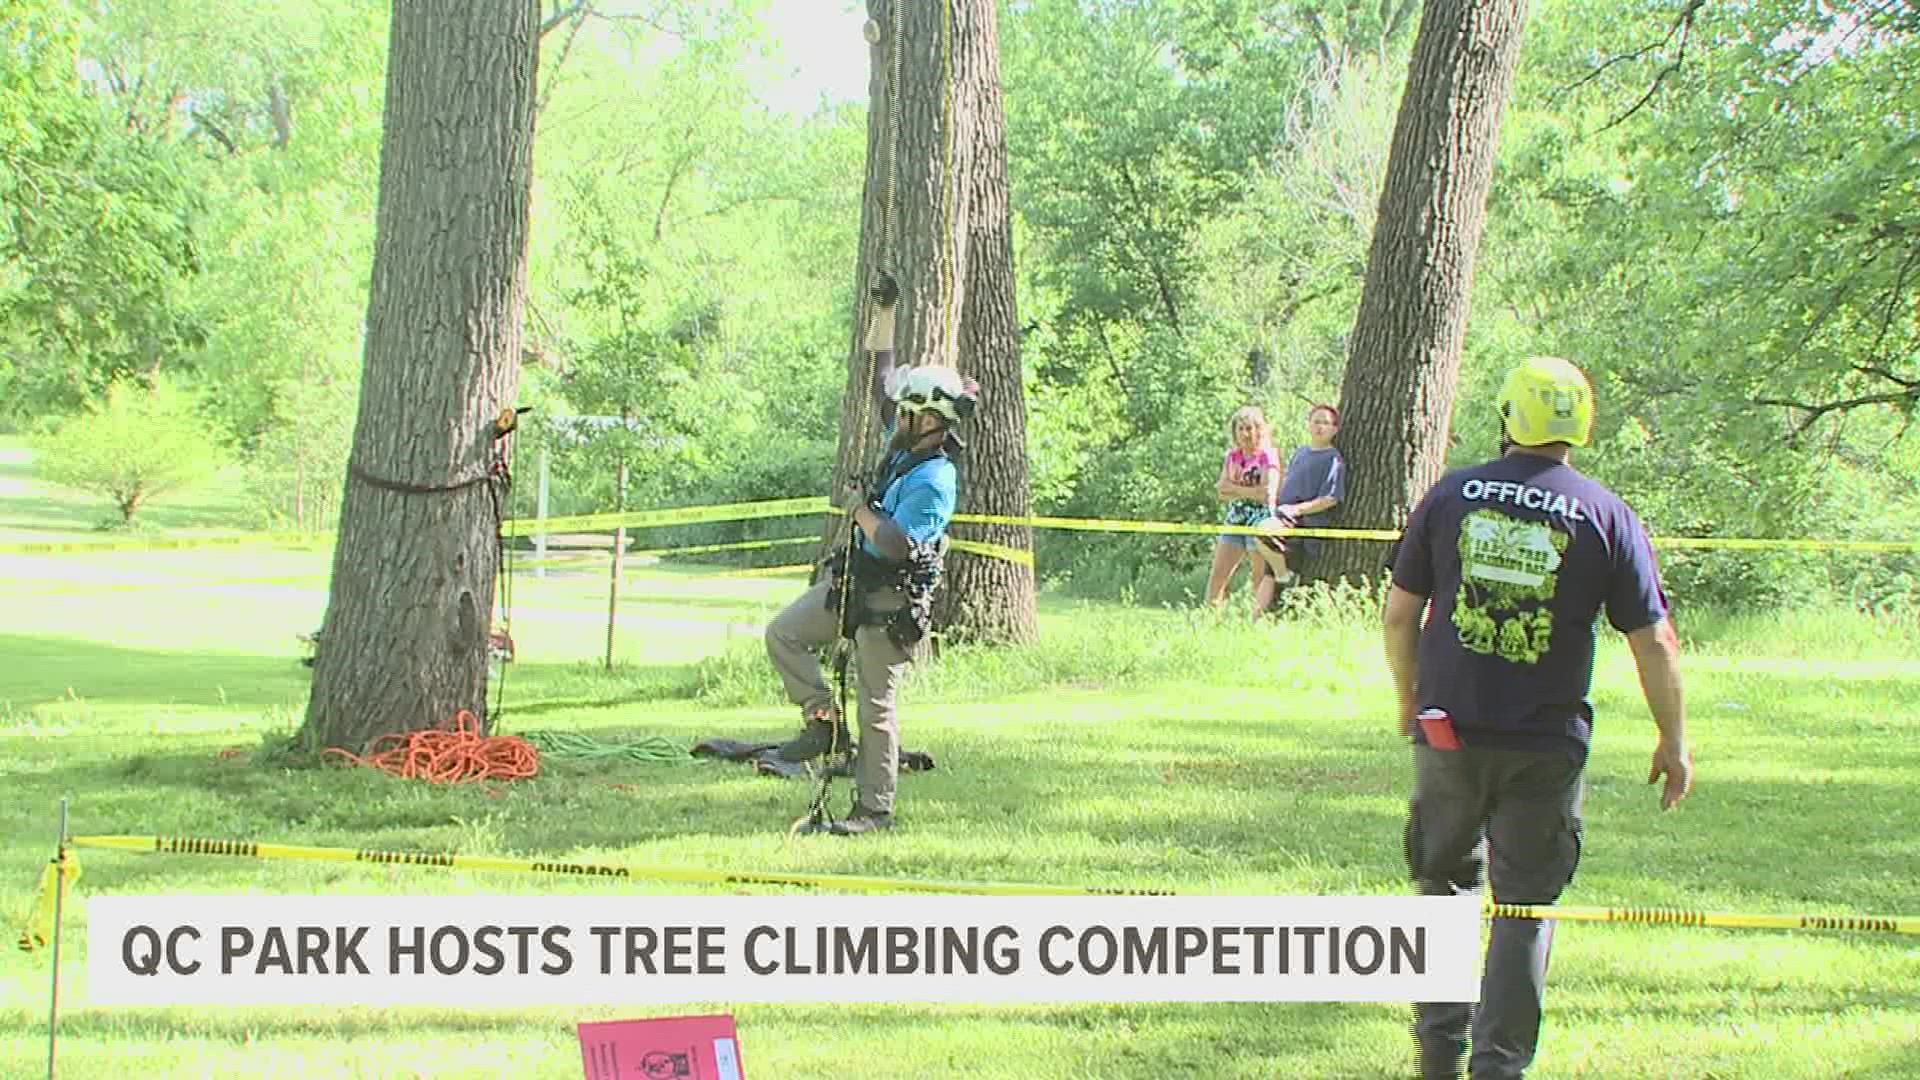 Climbers gathered at Duck Creek Park in Davenport to complete challenges like tree rescues, speed climbing, and an obstacle course for the annual competition.